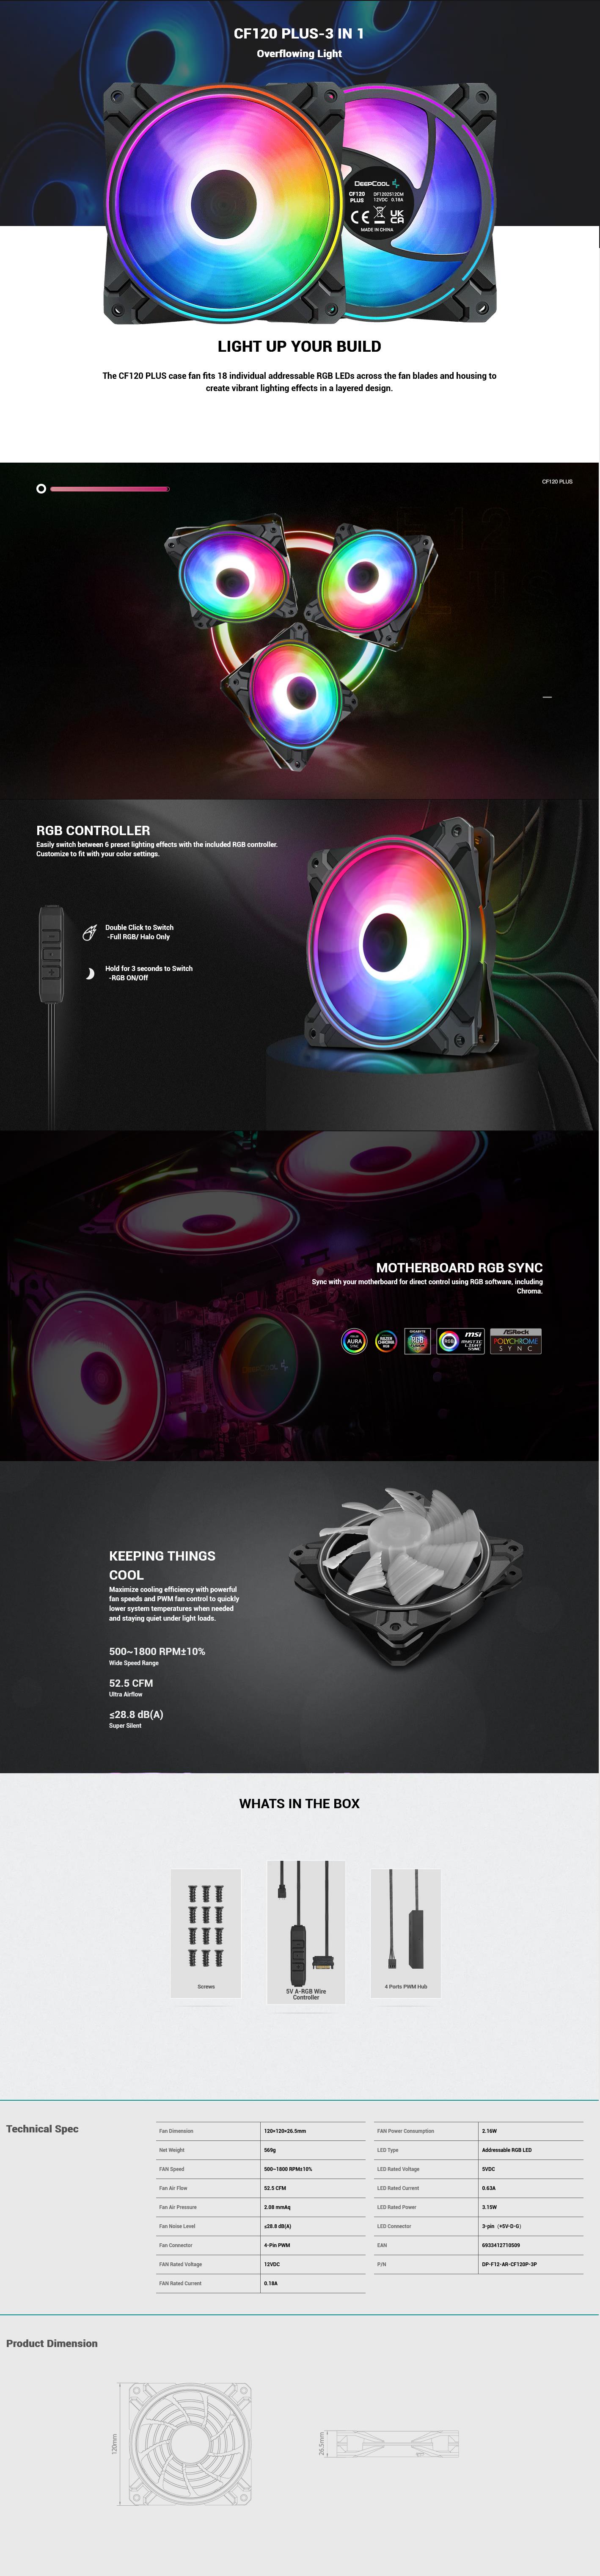 A large marketing image providing additional information about the product DeepCool CF120 Plus A-RGB 120mm Fans - 3 Pack - Additional alt info not provided